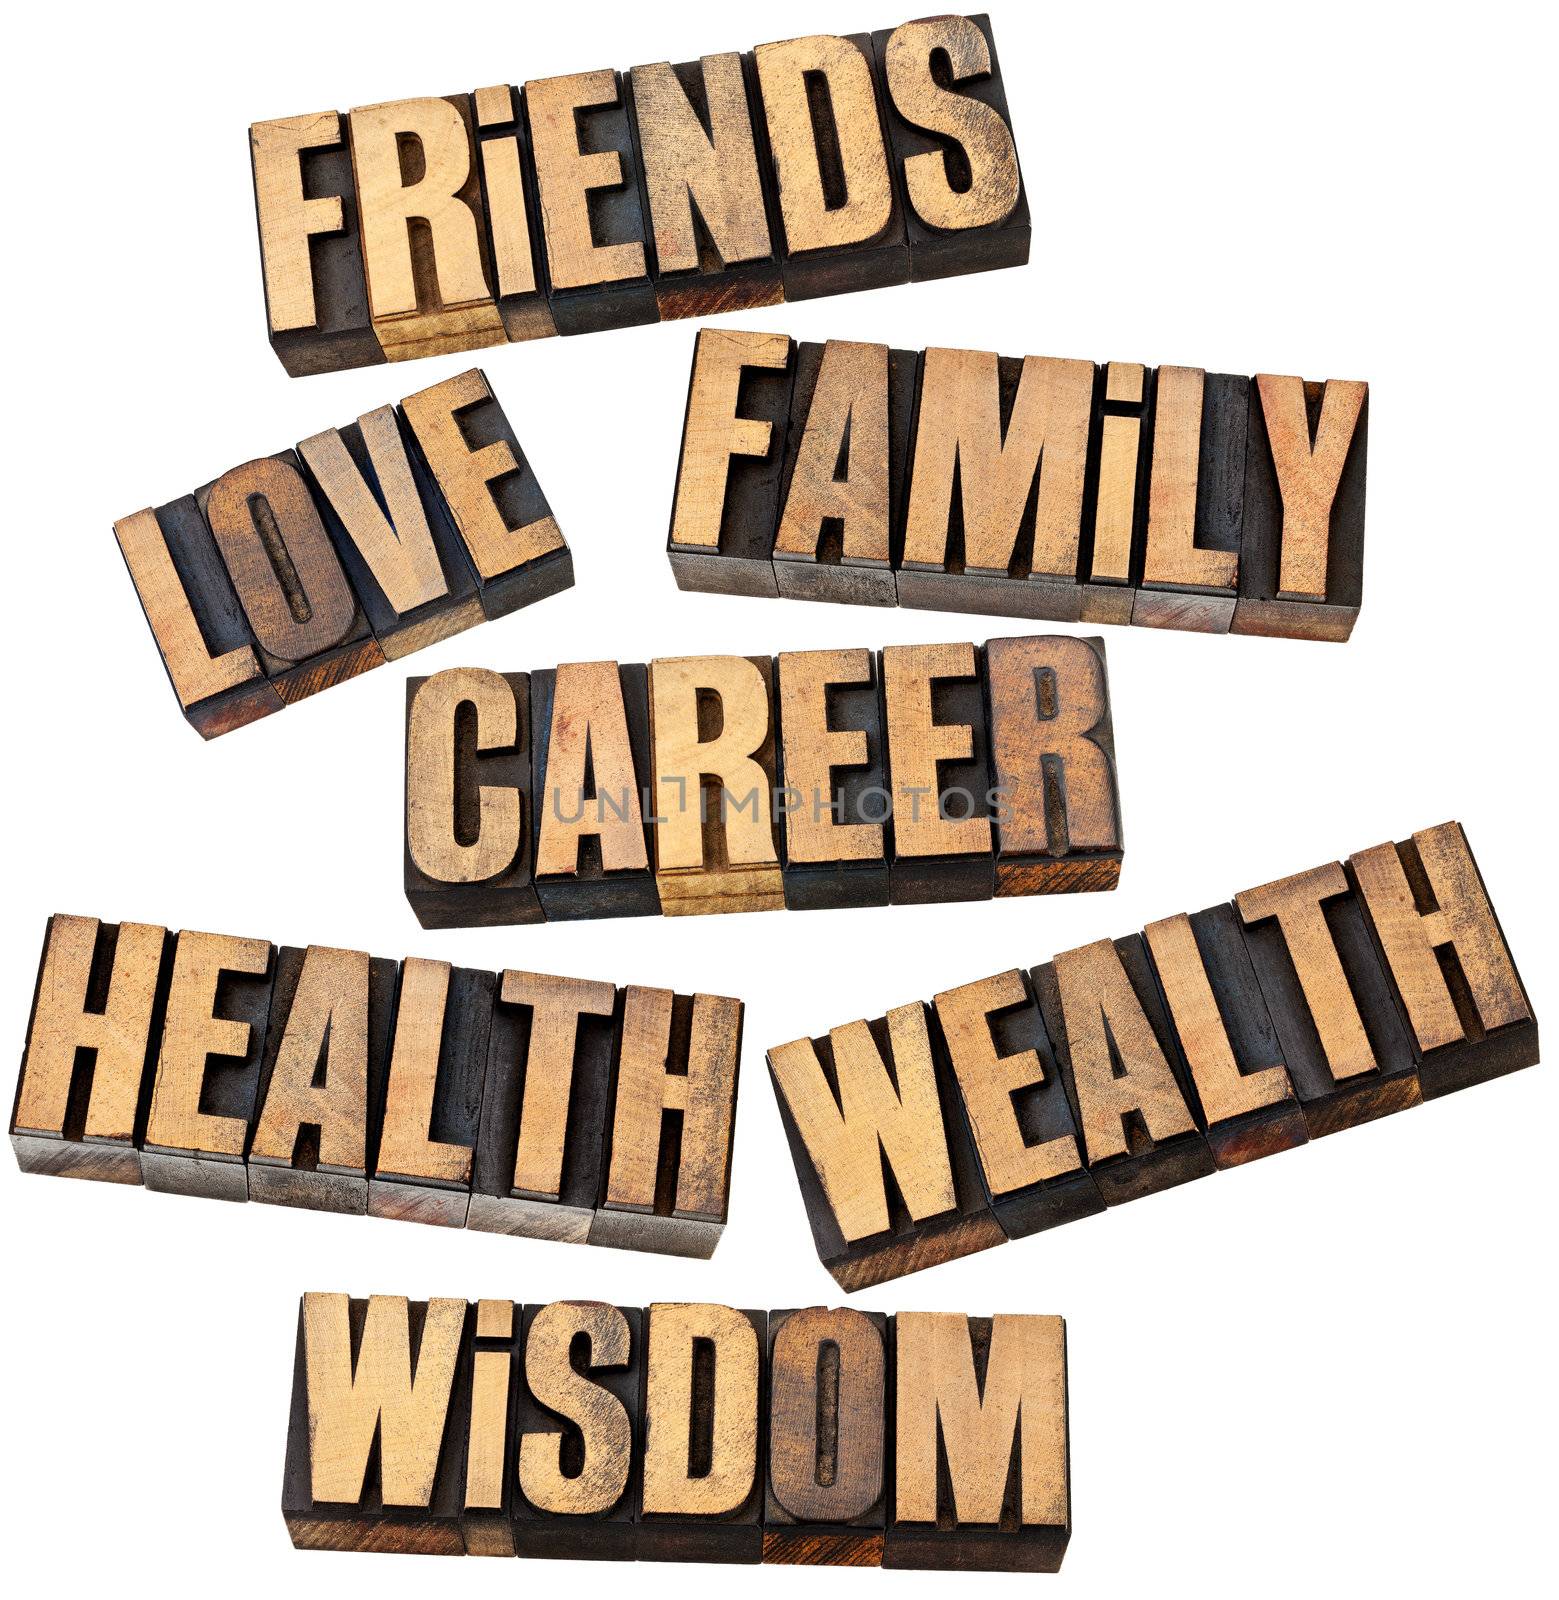 career, family, health and other values by PixelsAway